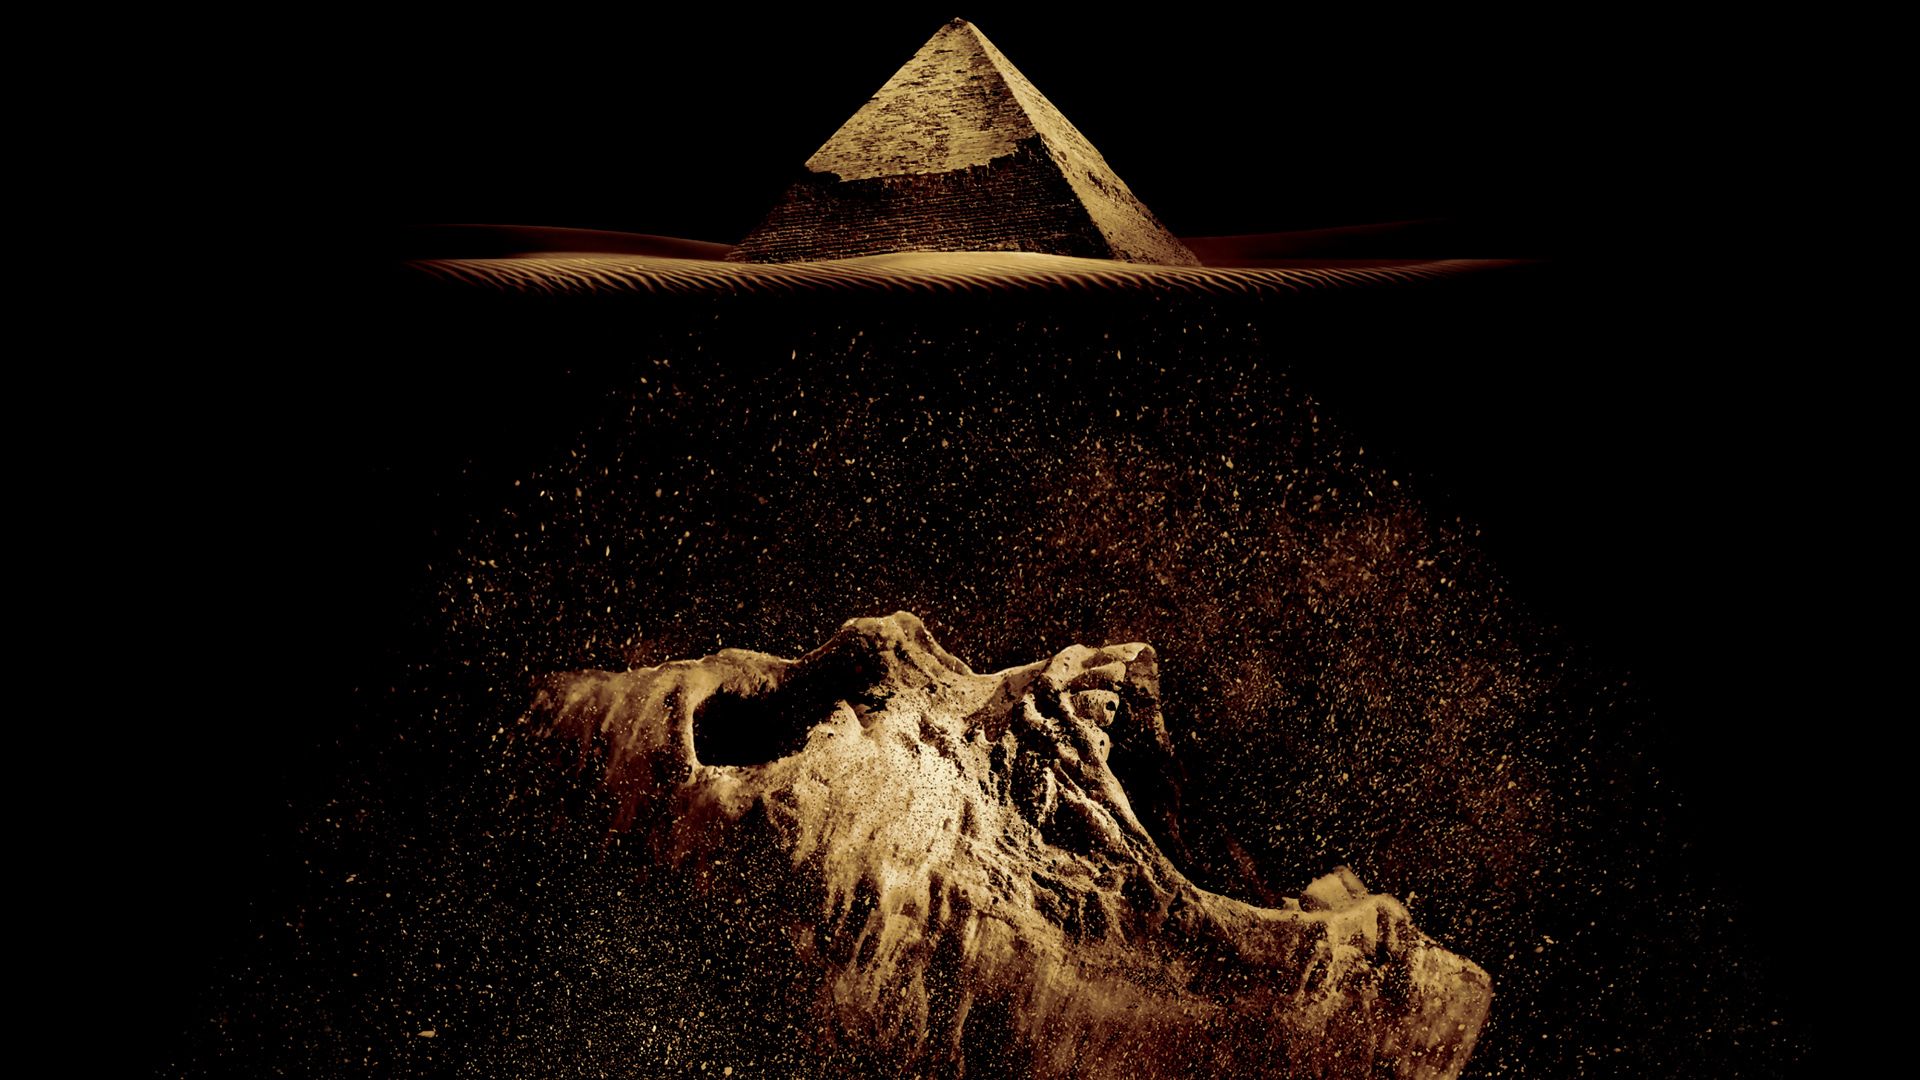 The Pyramid background